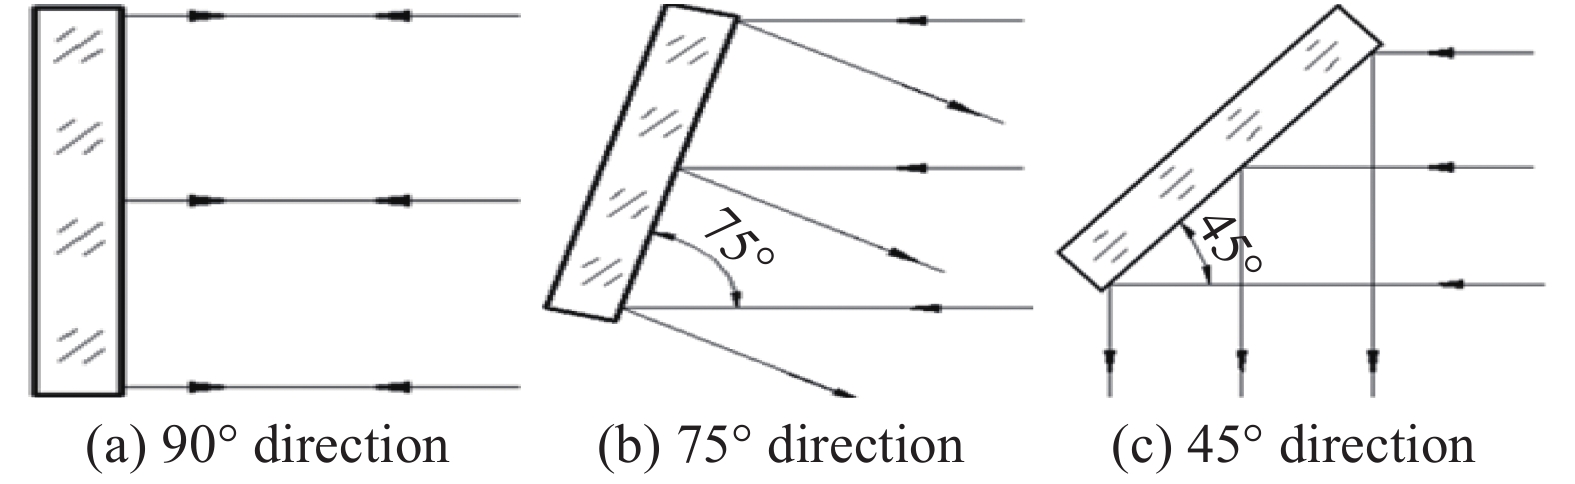 Different direction requirements of the mirror